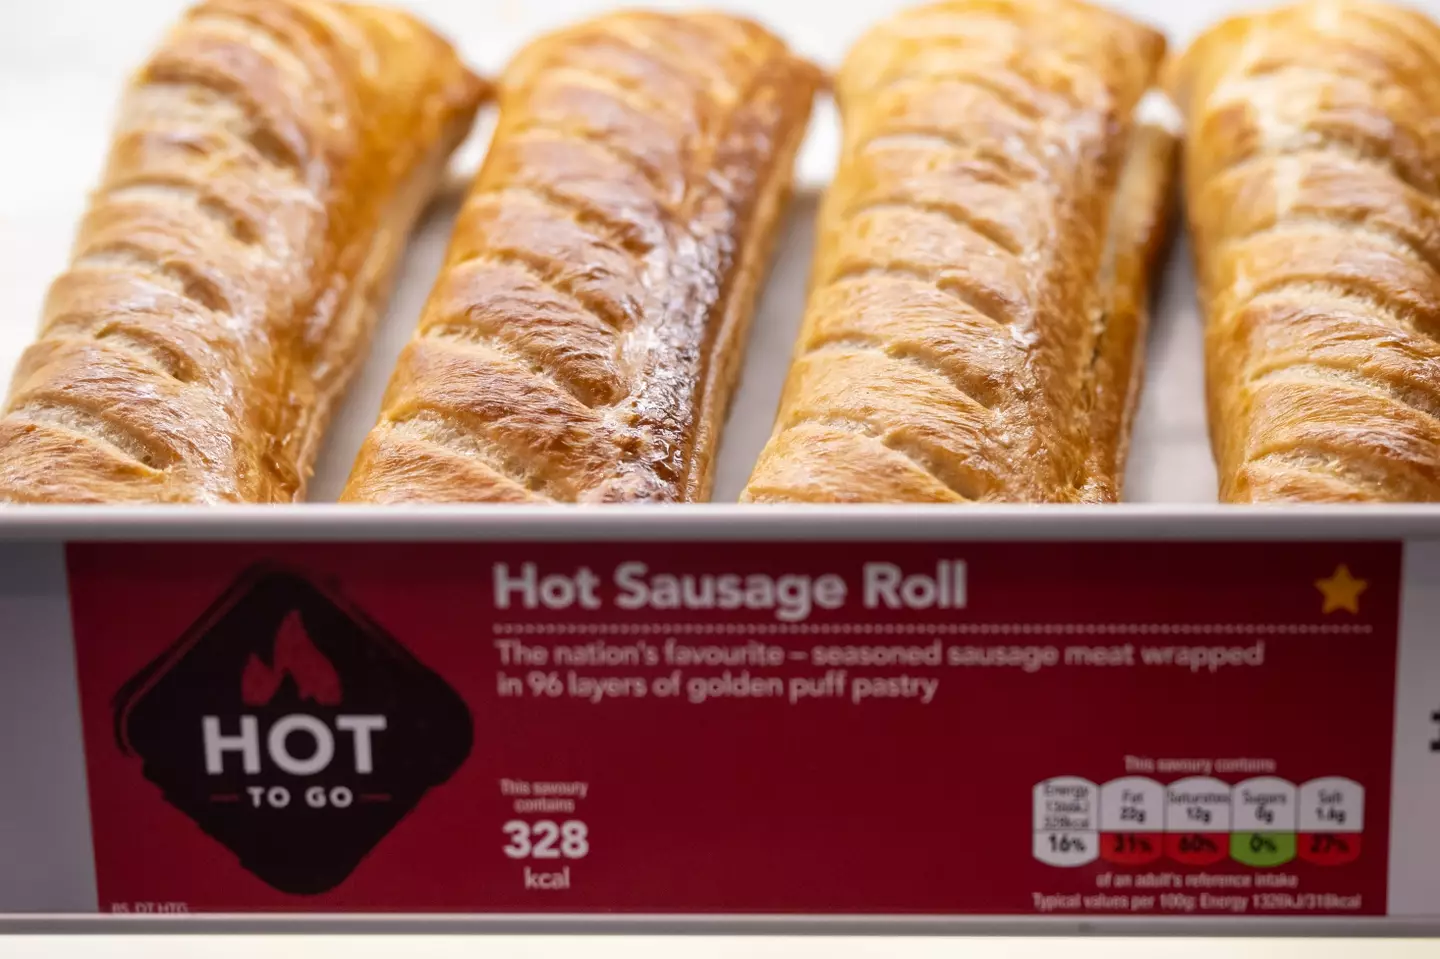 Greggs sausage rolls are stupendous, but they are not always warm are they?